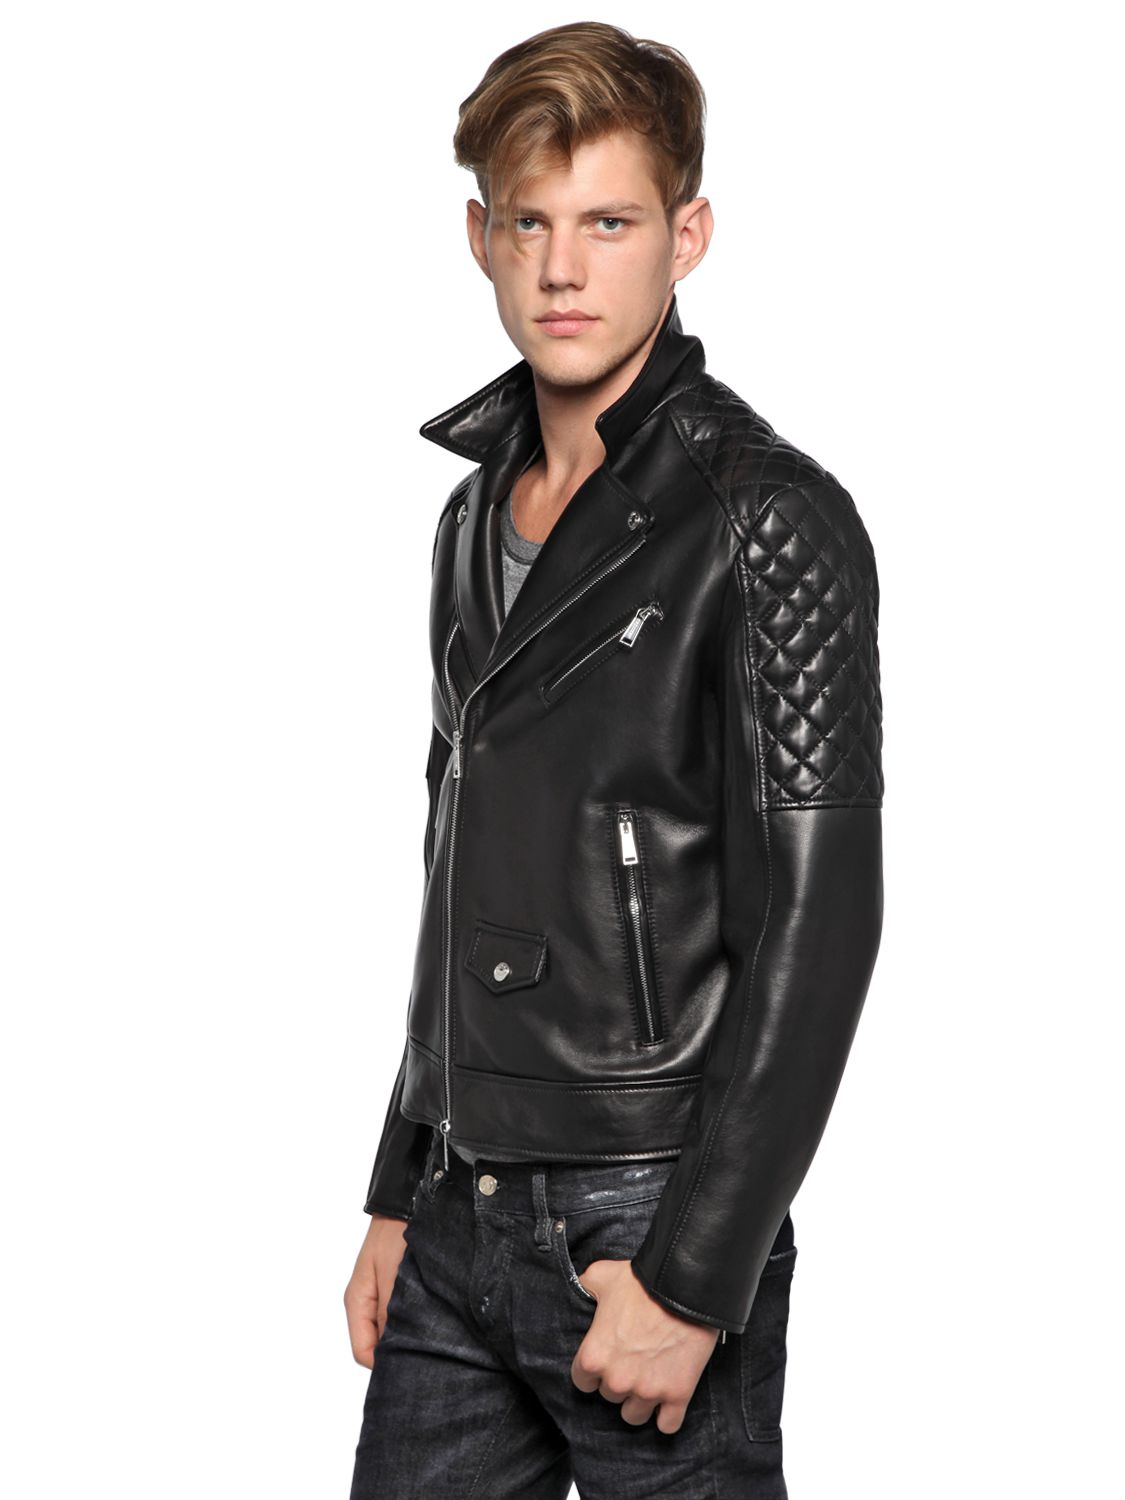 DSquared² Quilted Soft Nappa Leather Biker Jacket in Black for Men - Lyst